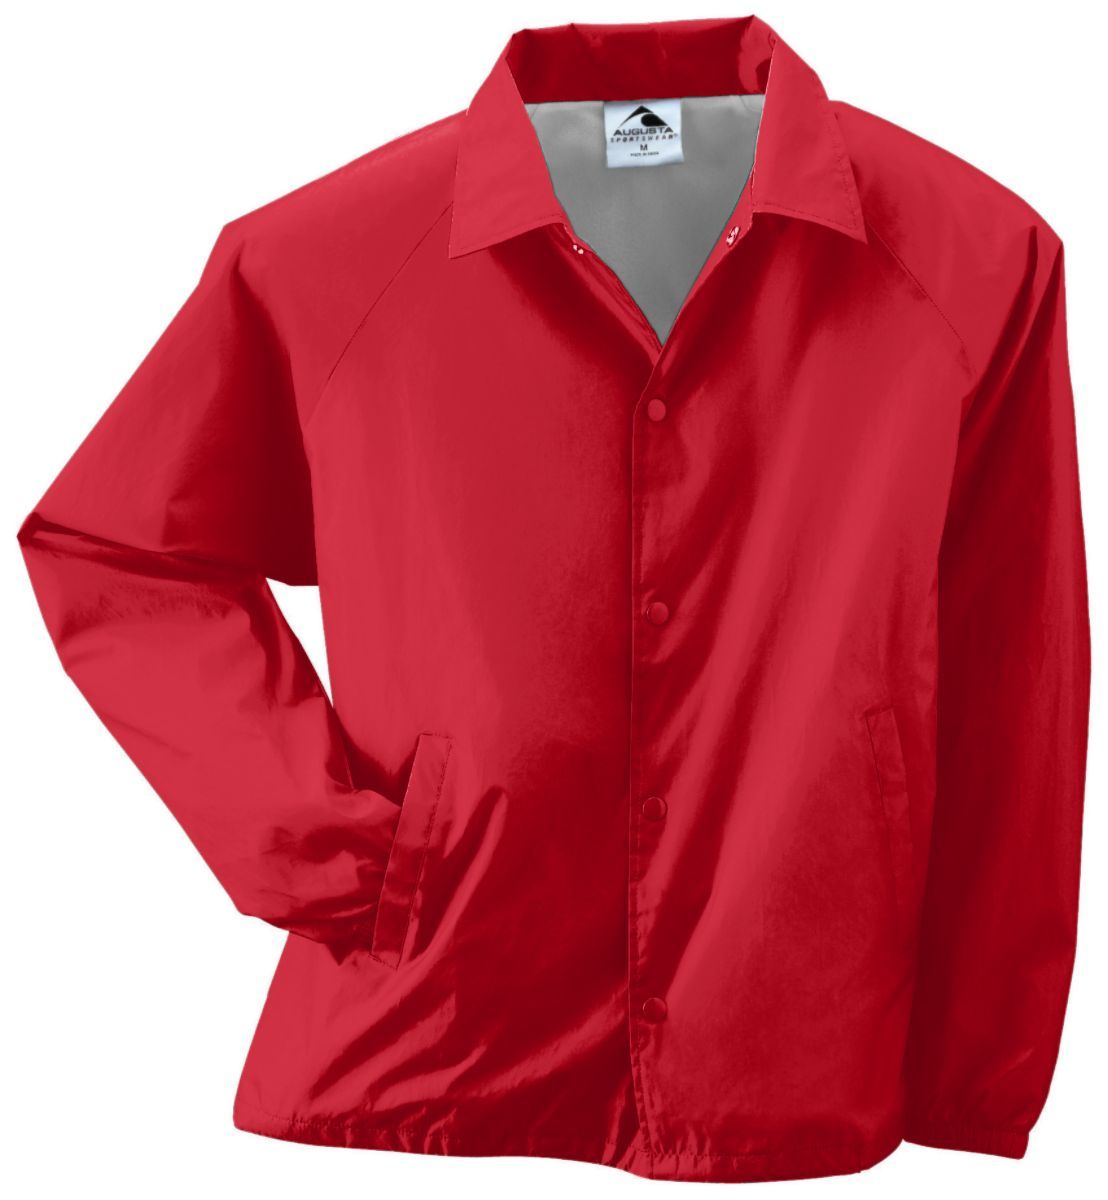 Augusta Sportswear Youth Nylon Coach'S Jacket in Red  -Part of the Youth, Youth-Jacket, Augusta-Products, Outerwear product lines at KanaleyCreations.com